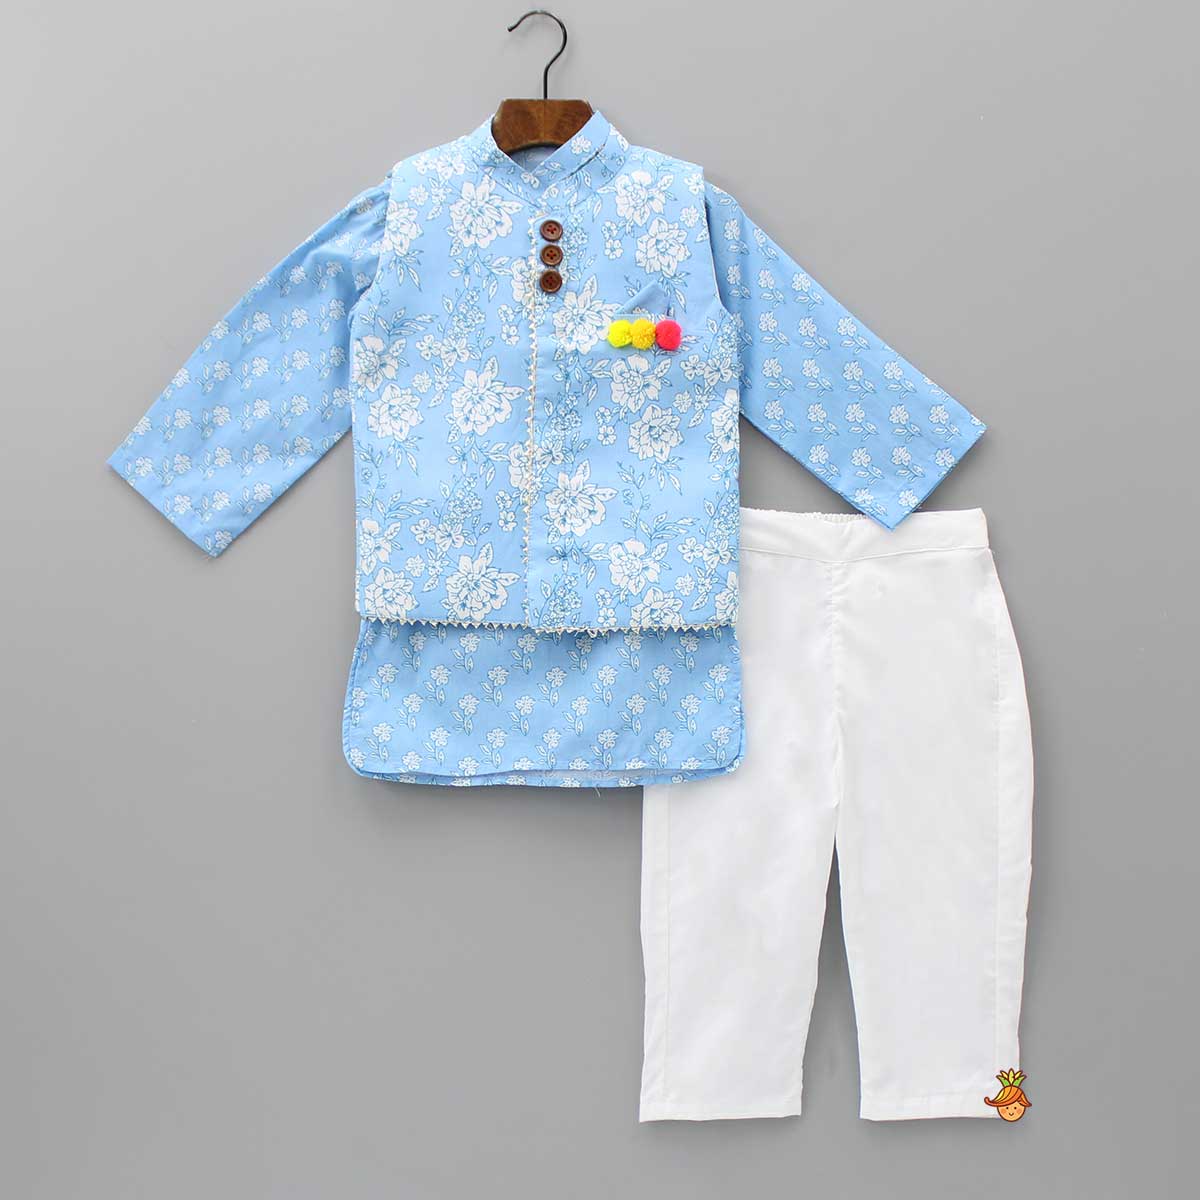 Pre Order: Gota Lace Detailed Powder Blue Ethnic Kurta With Floral Printed Jacket And Pyjama